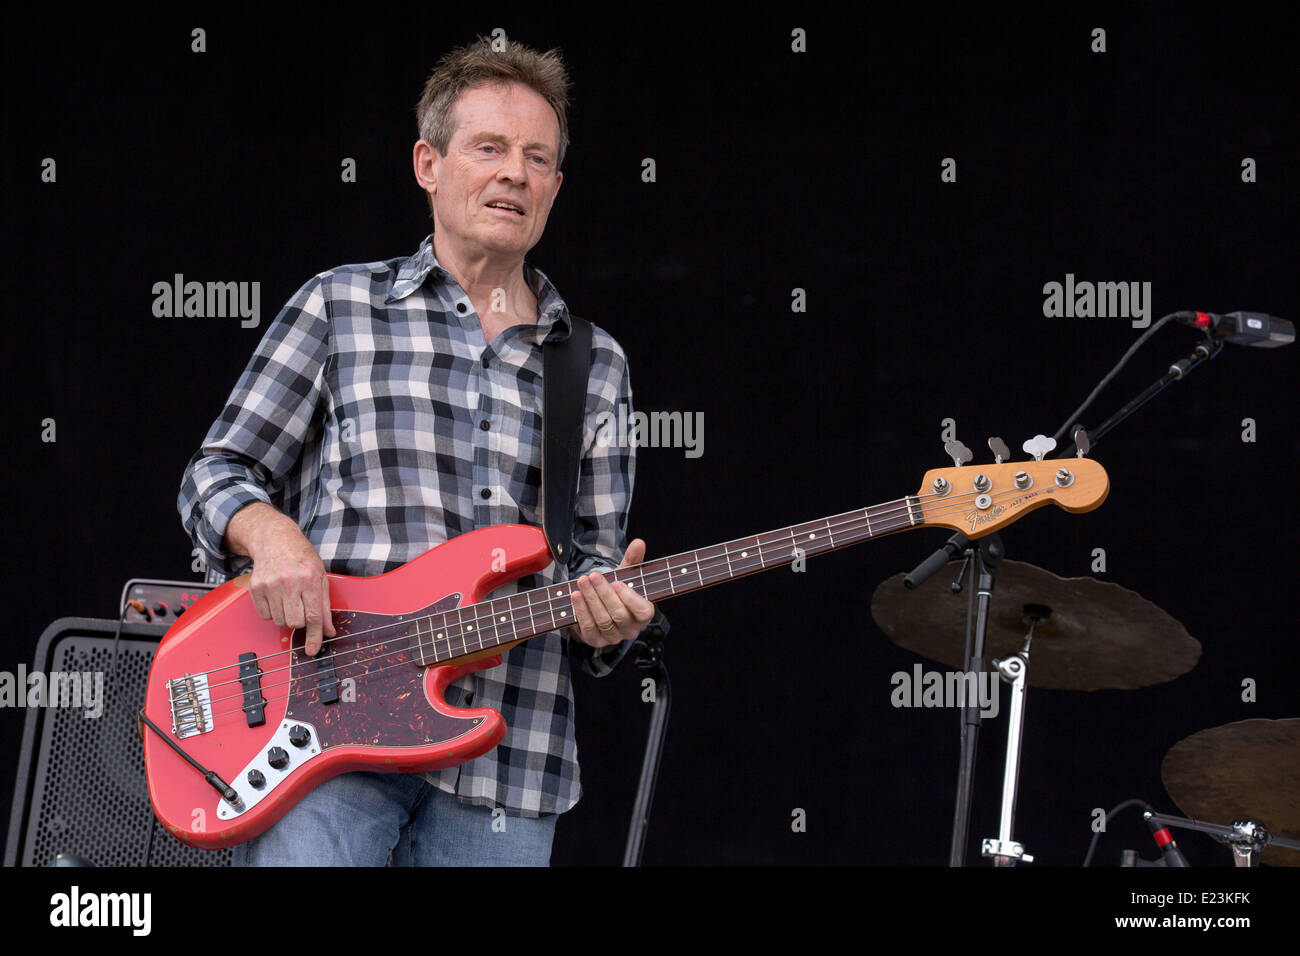 Manchester, Tennessee, USA. 14th June, 2014. Bassist JOHN PAUL JONES performs with Seasick Steve at the 2014 Bonnaroo Music and Arts Festival in Manchester, Tennessee Credit:  Daniel DeSlover/ZUMAPRESS.com/Alamy Live News Stock Photo